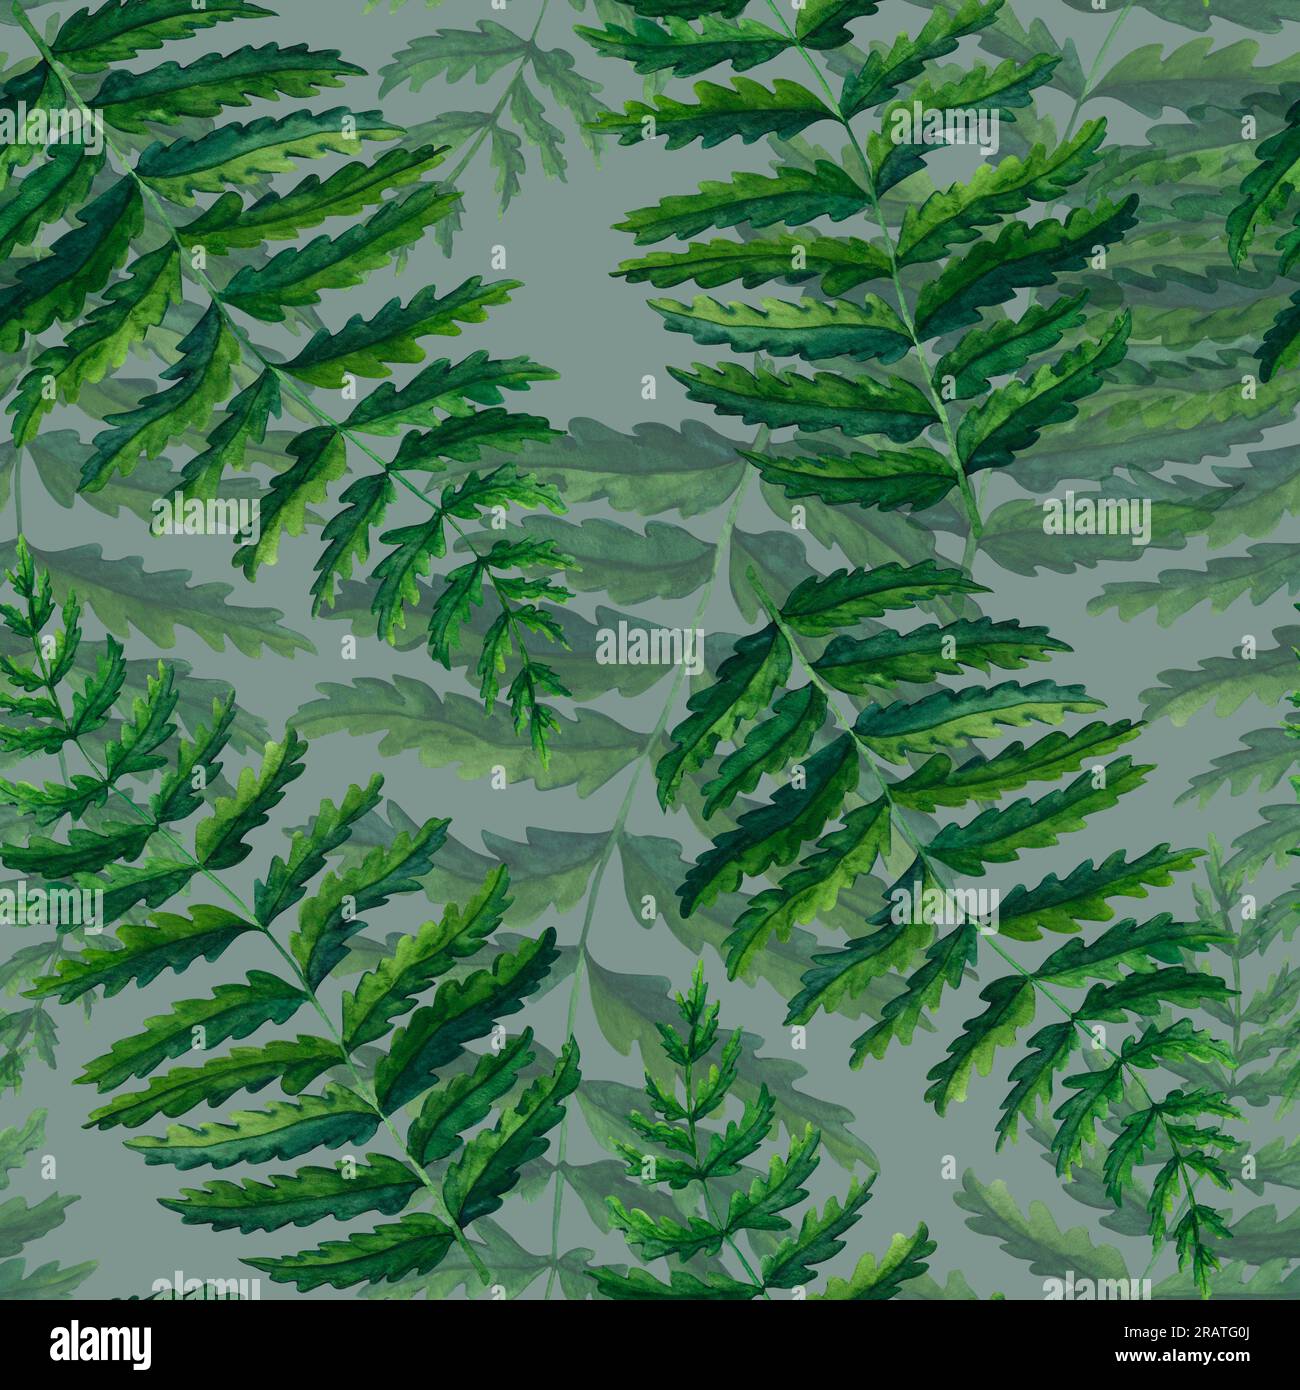 Seamless pattern fern watercolor hand painted illustration in green colors, greenery branch, twig, stem, forest plant isolated on grey background for Stock Photo